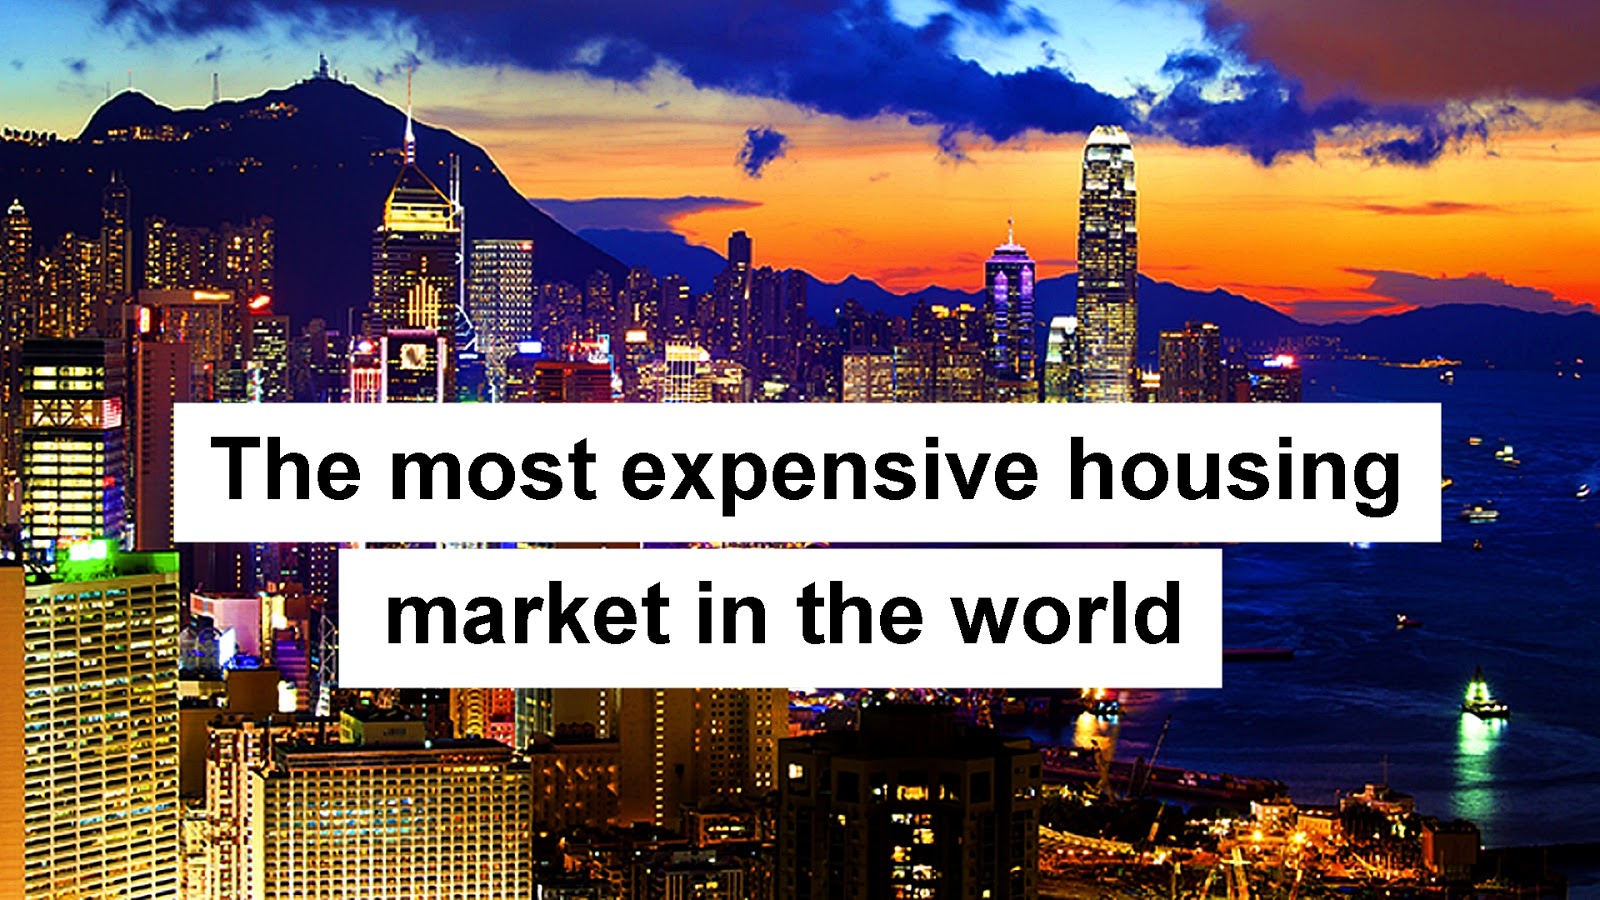 Online Financial Advice Hong Kong retains the title of most expensive